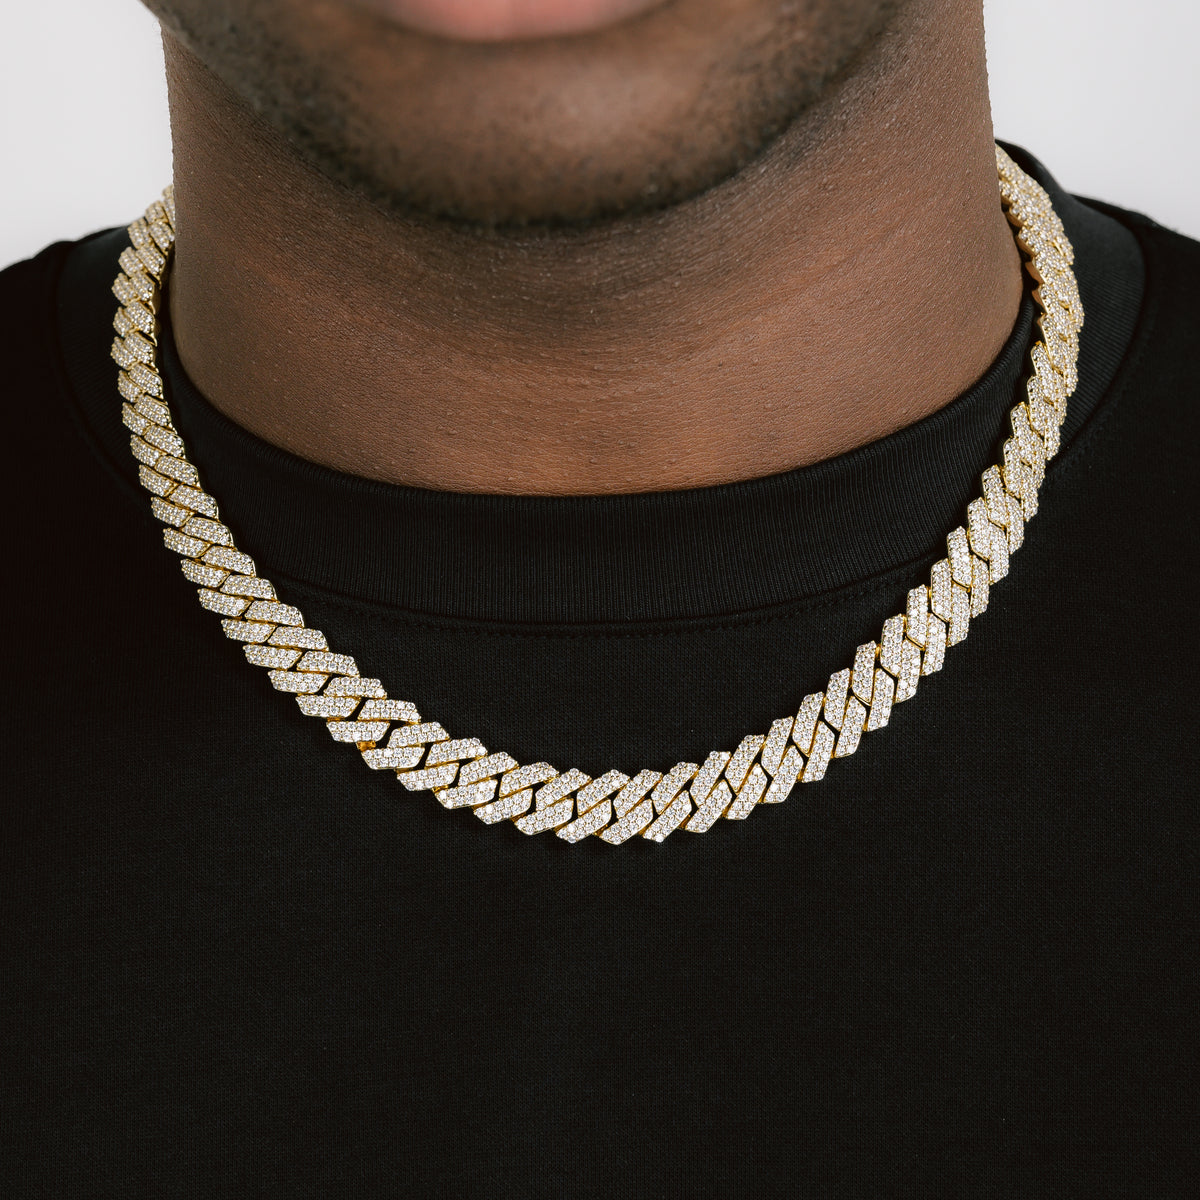 Number 23 Cuban Chain for Men Iced Out Choker Necklace Real Gold